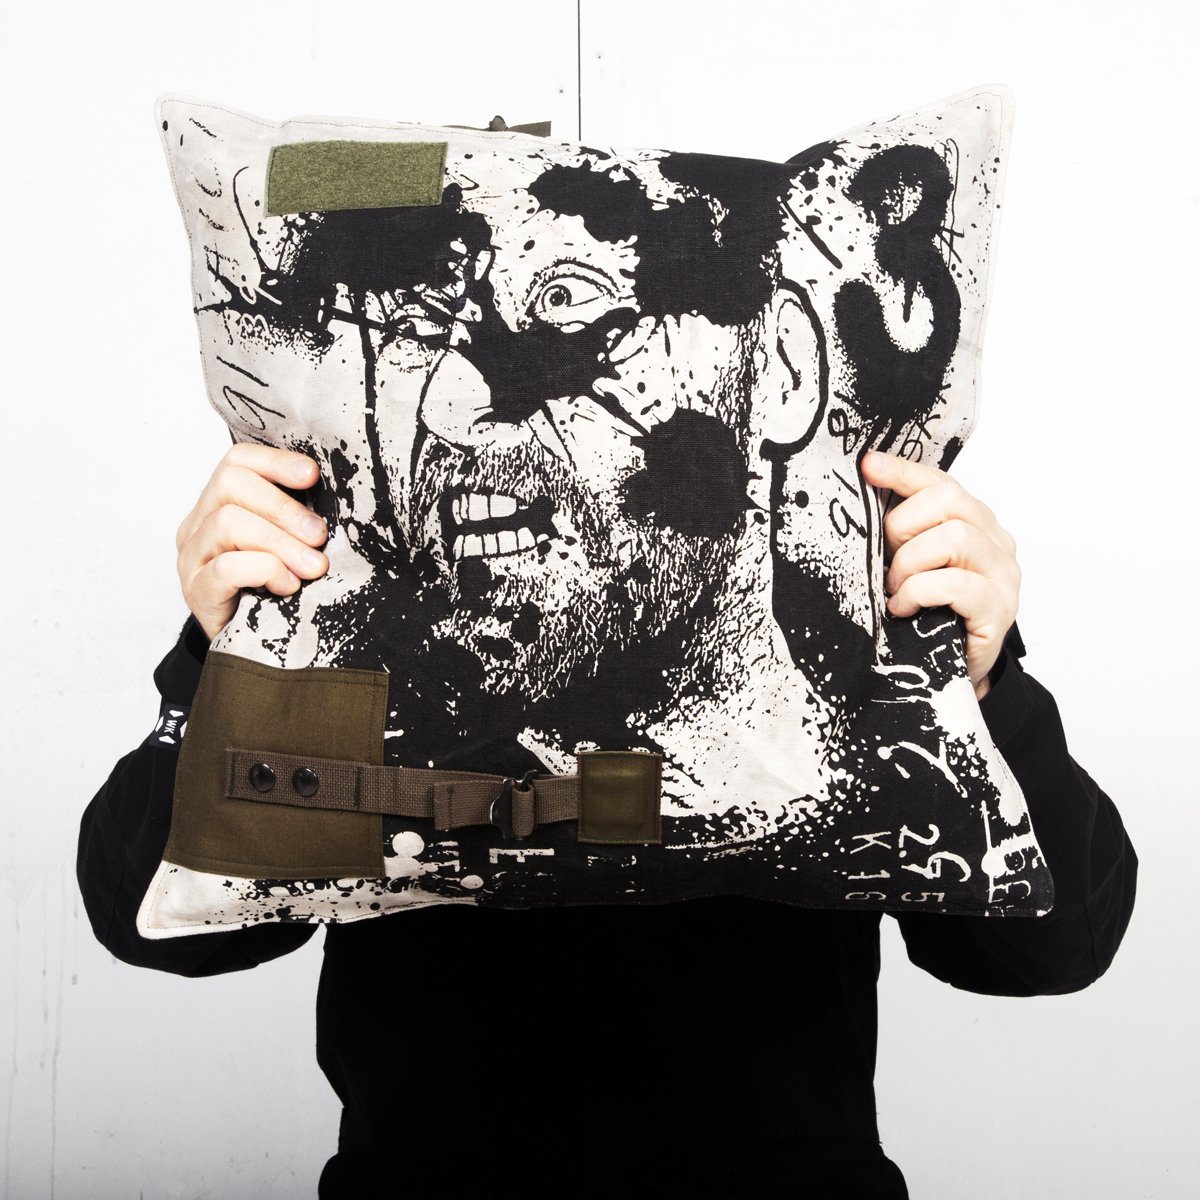 Image of WK - PILLOW 02